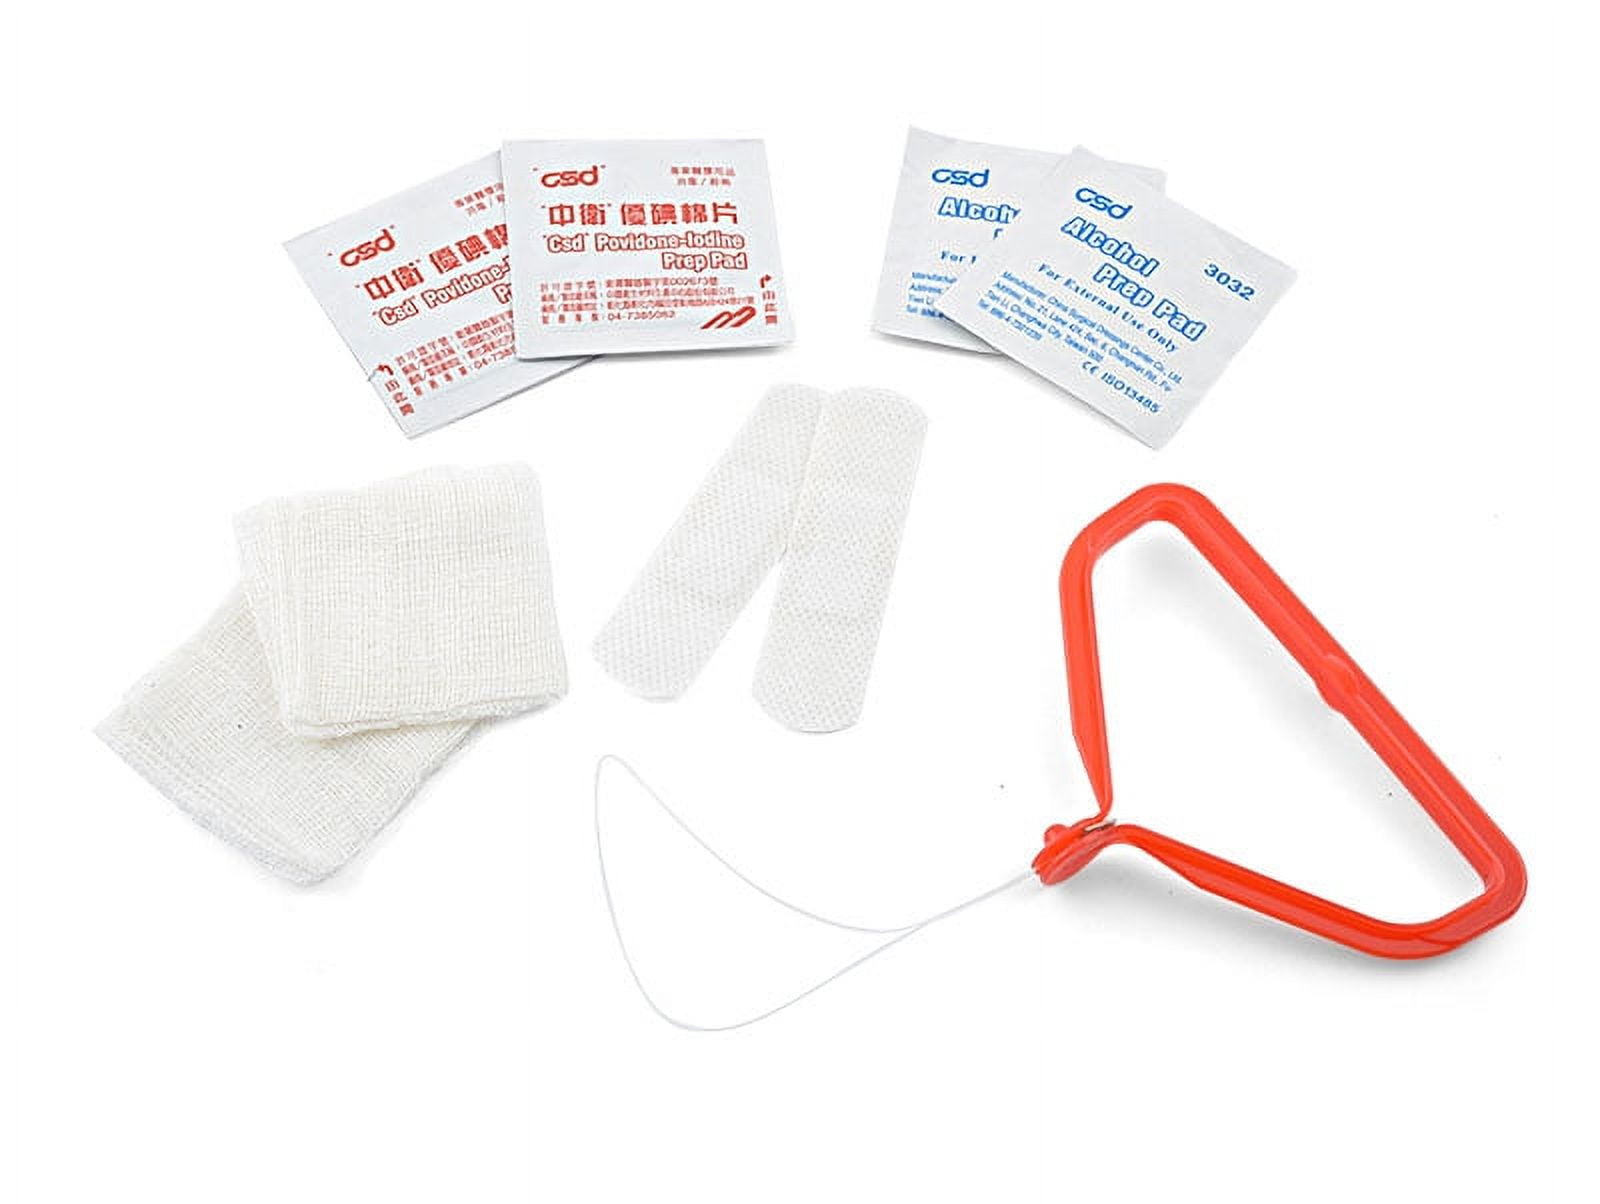 South Bend South Bend Emergency Hook Remover & First Aid KitFirst Aid Kit